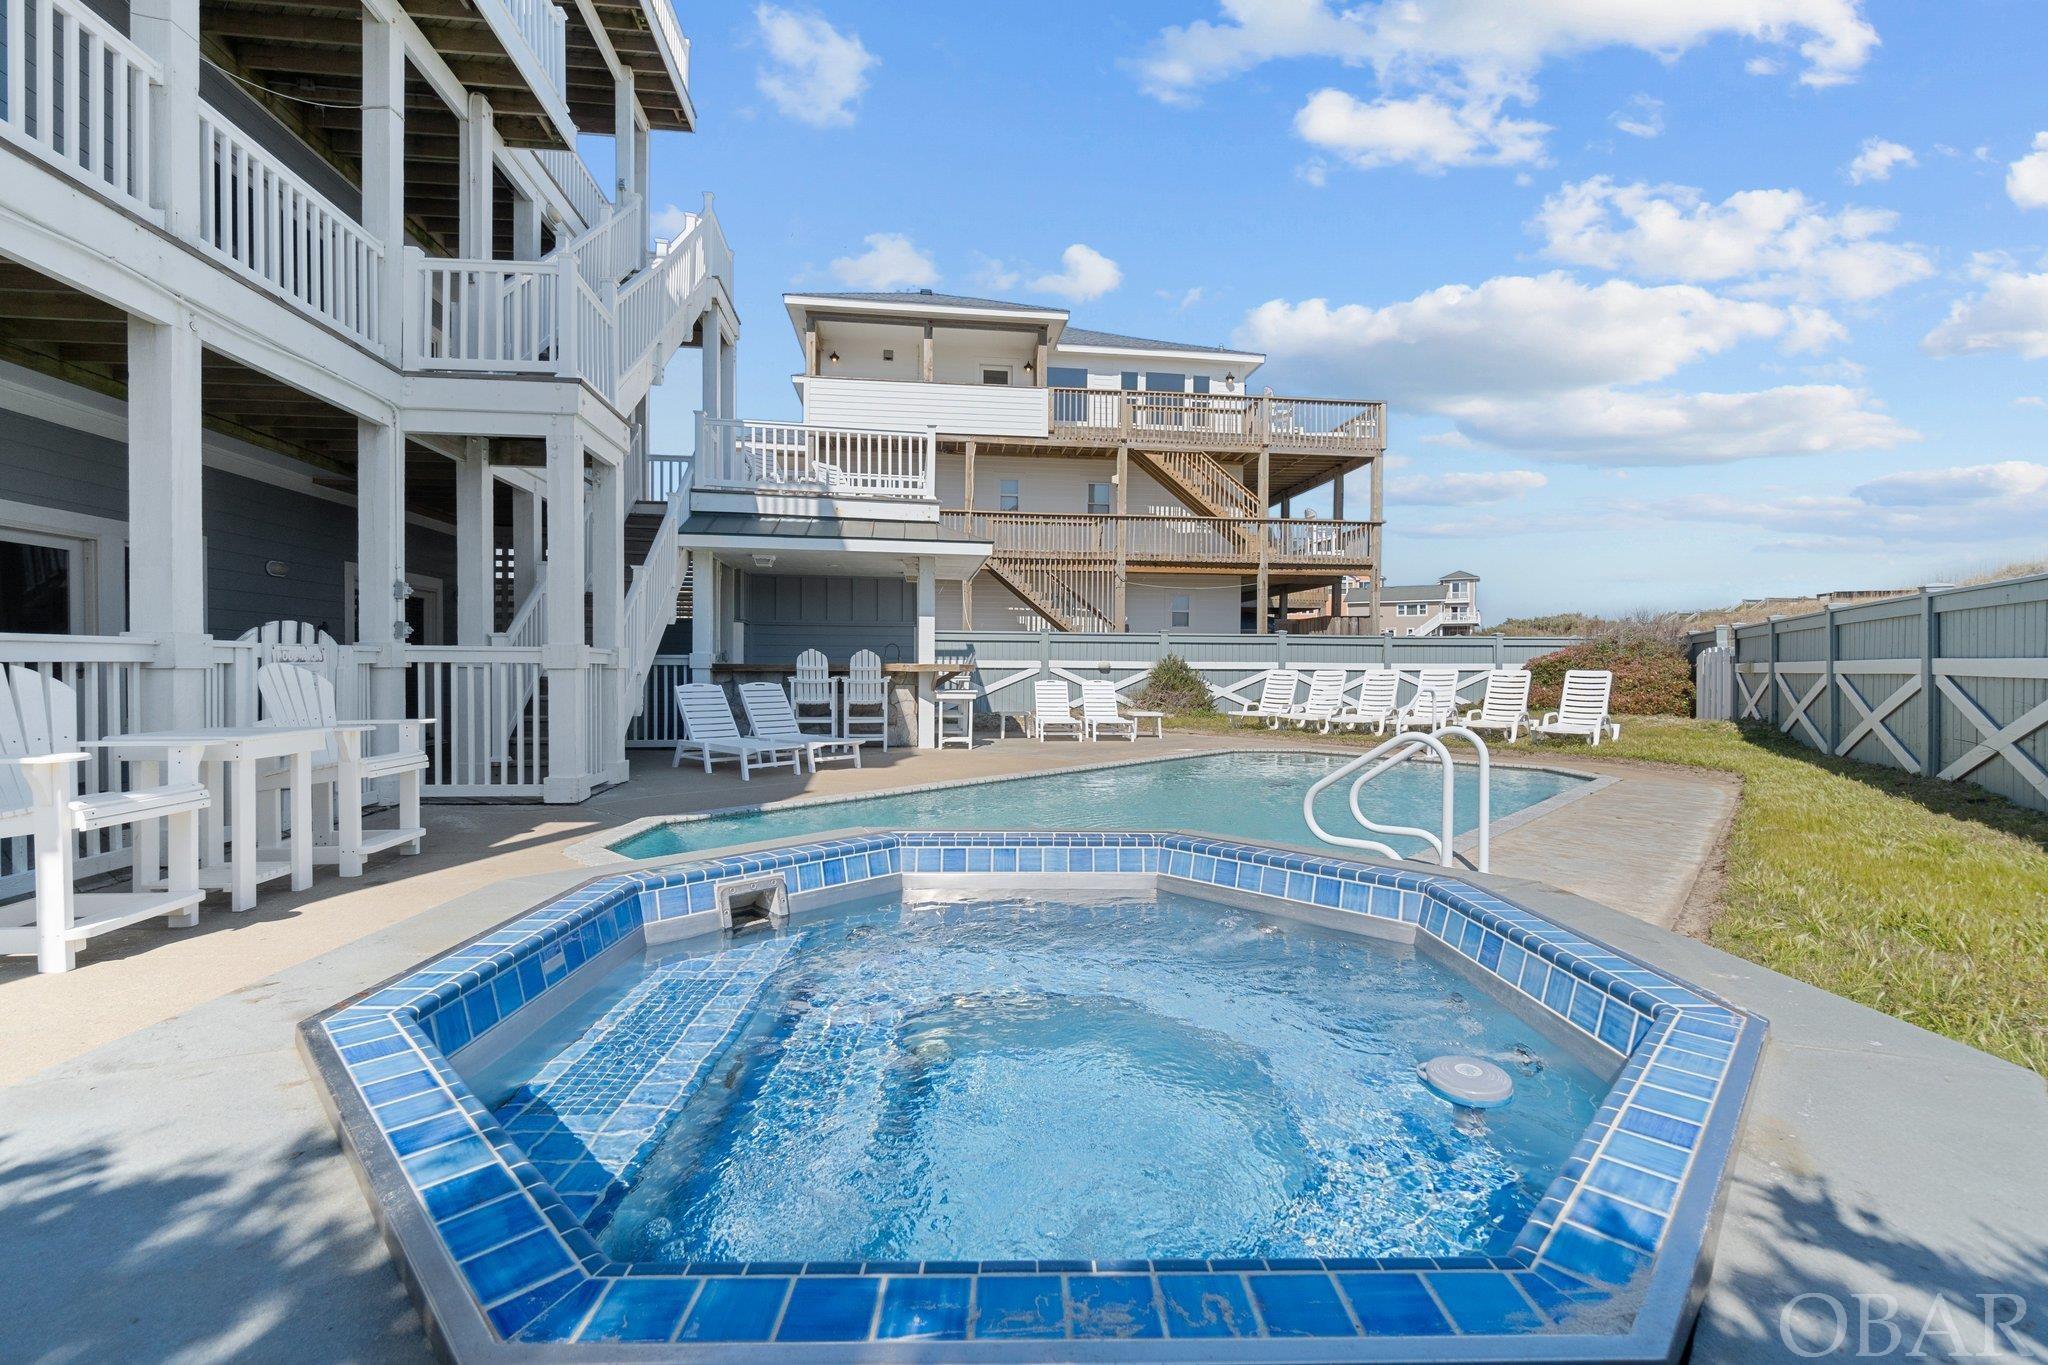 56999 Lighthouse Court, Hatteras, NC 27943, 8 Bedrooms Bedrooms, ,8 BathroomsBathrooms,Residential,For sale,Lighthouse Court,125266